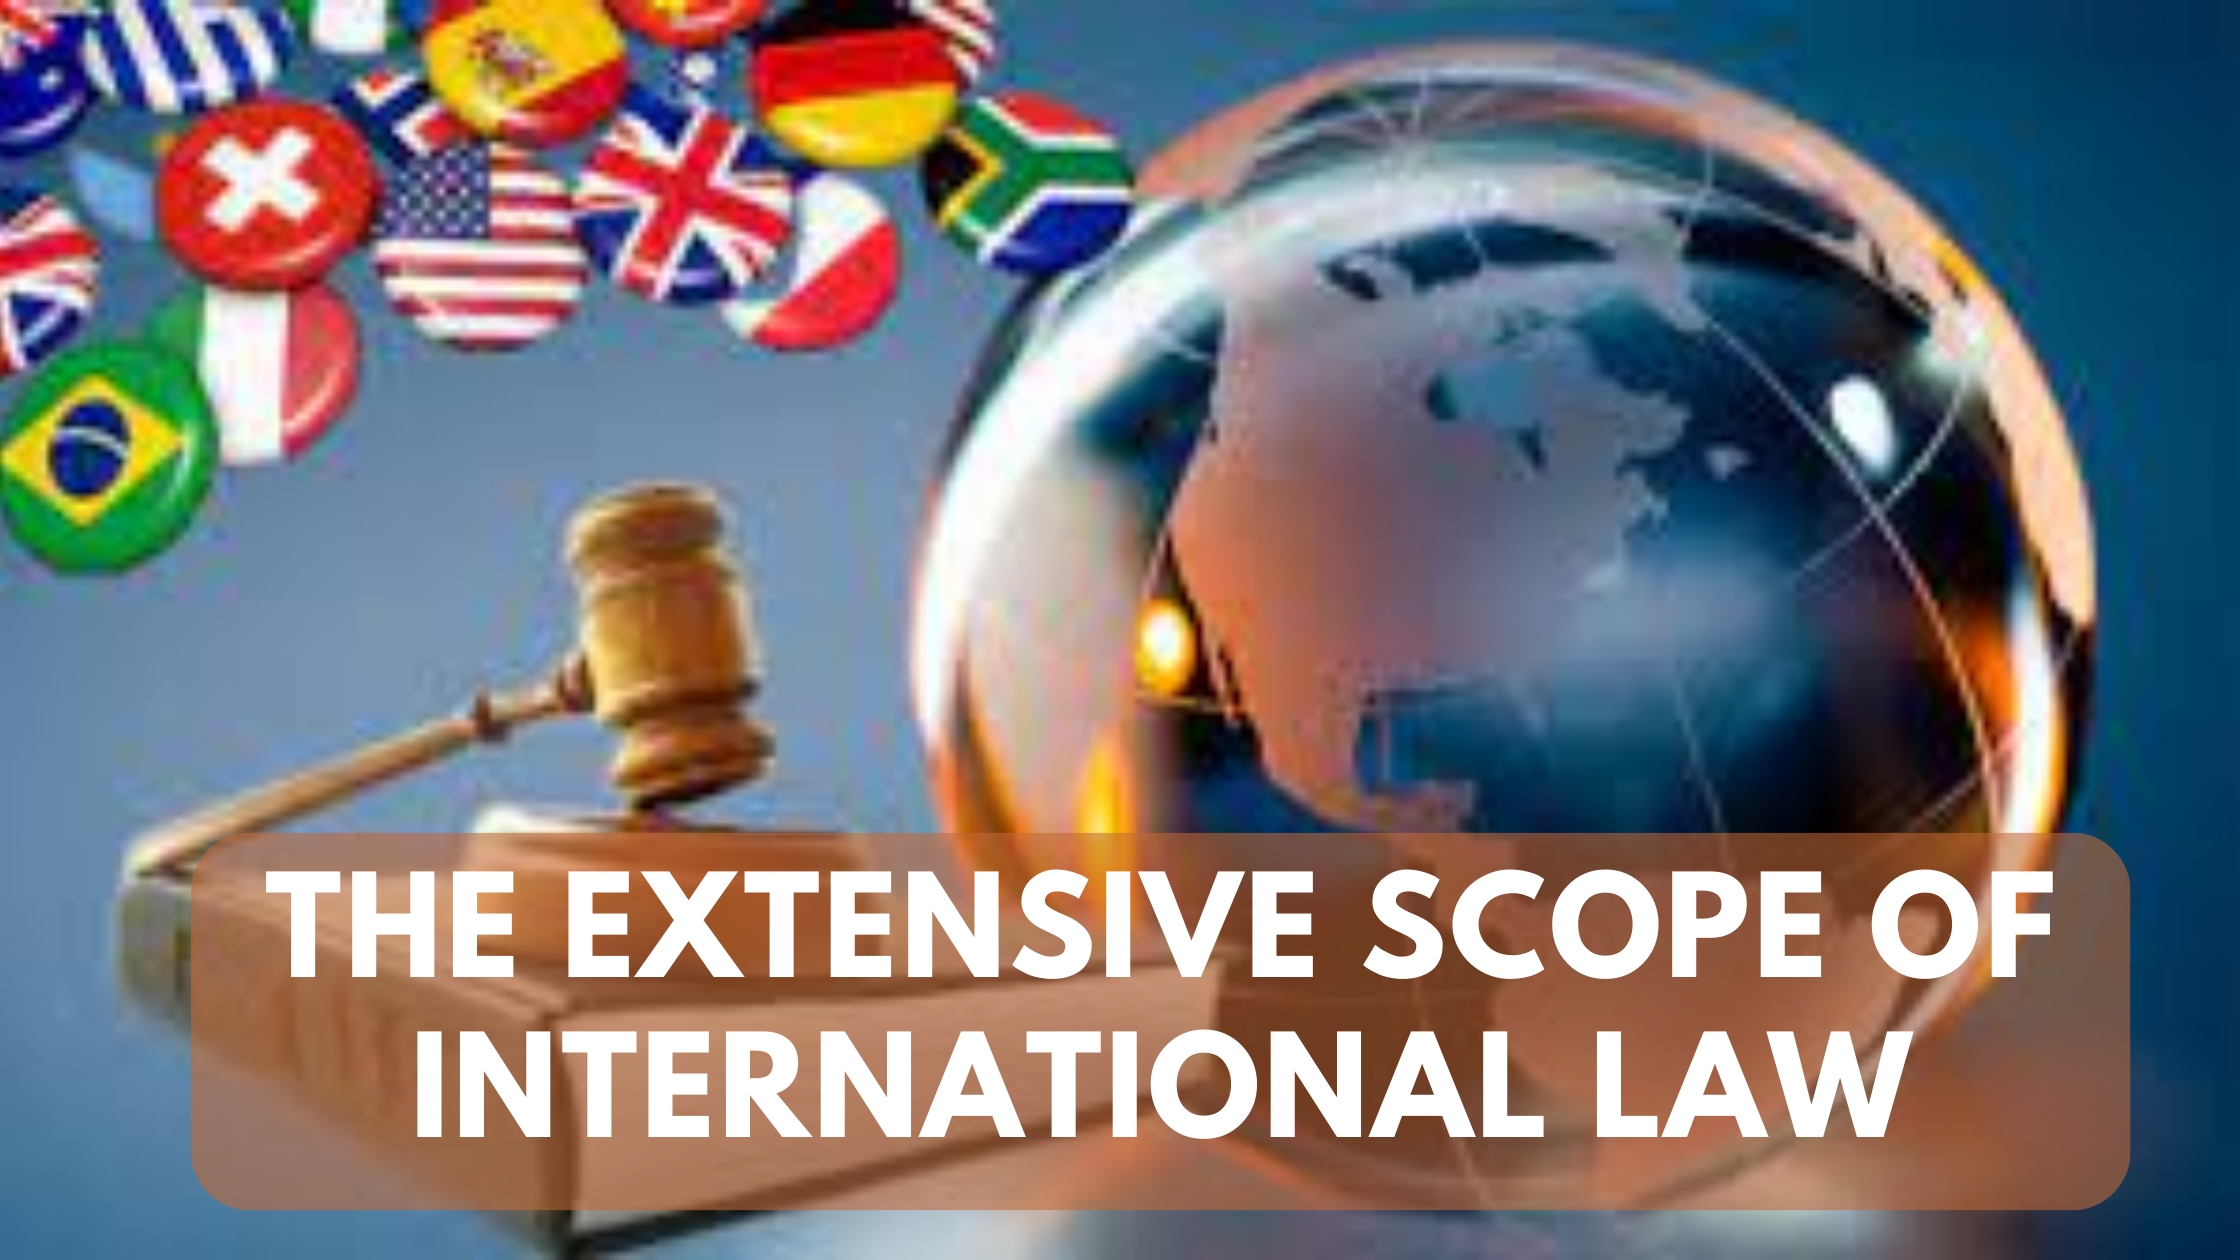 The Extensive Scope of International Law